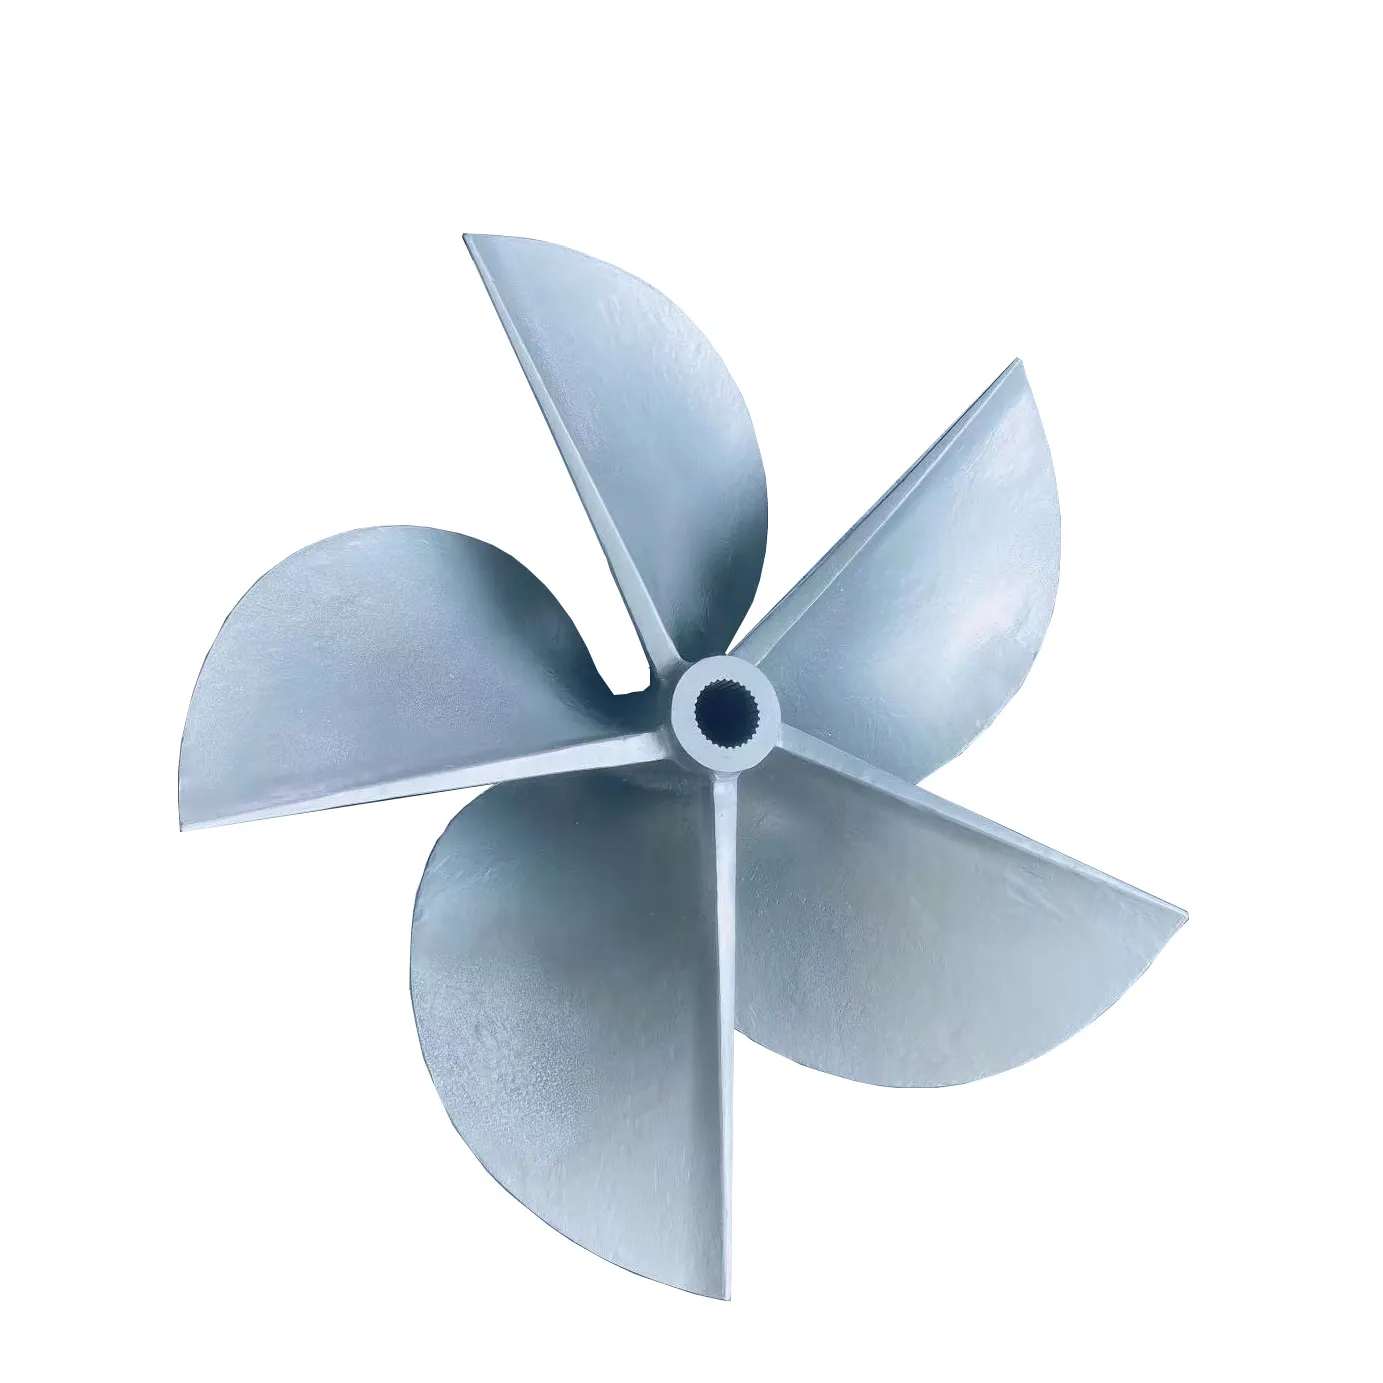 Haishen BH450 3 blade outboard propeller kit for Outboard Motor boat propeller marine propeller